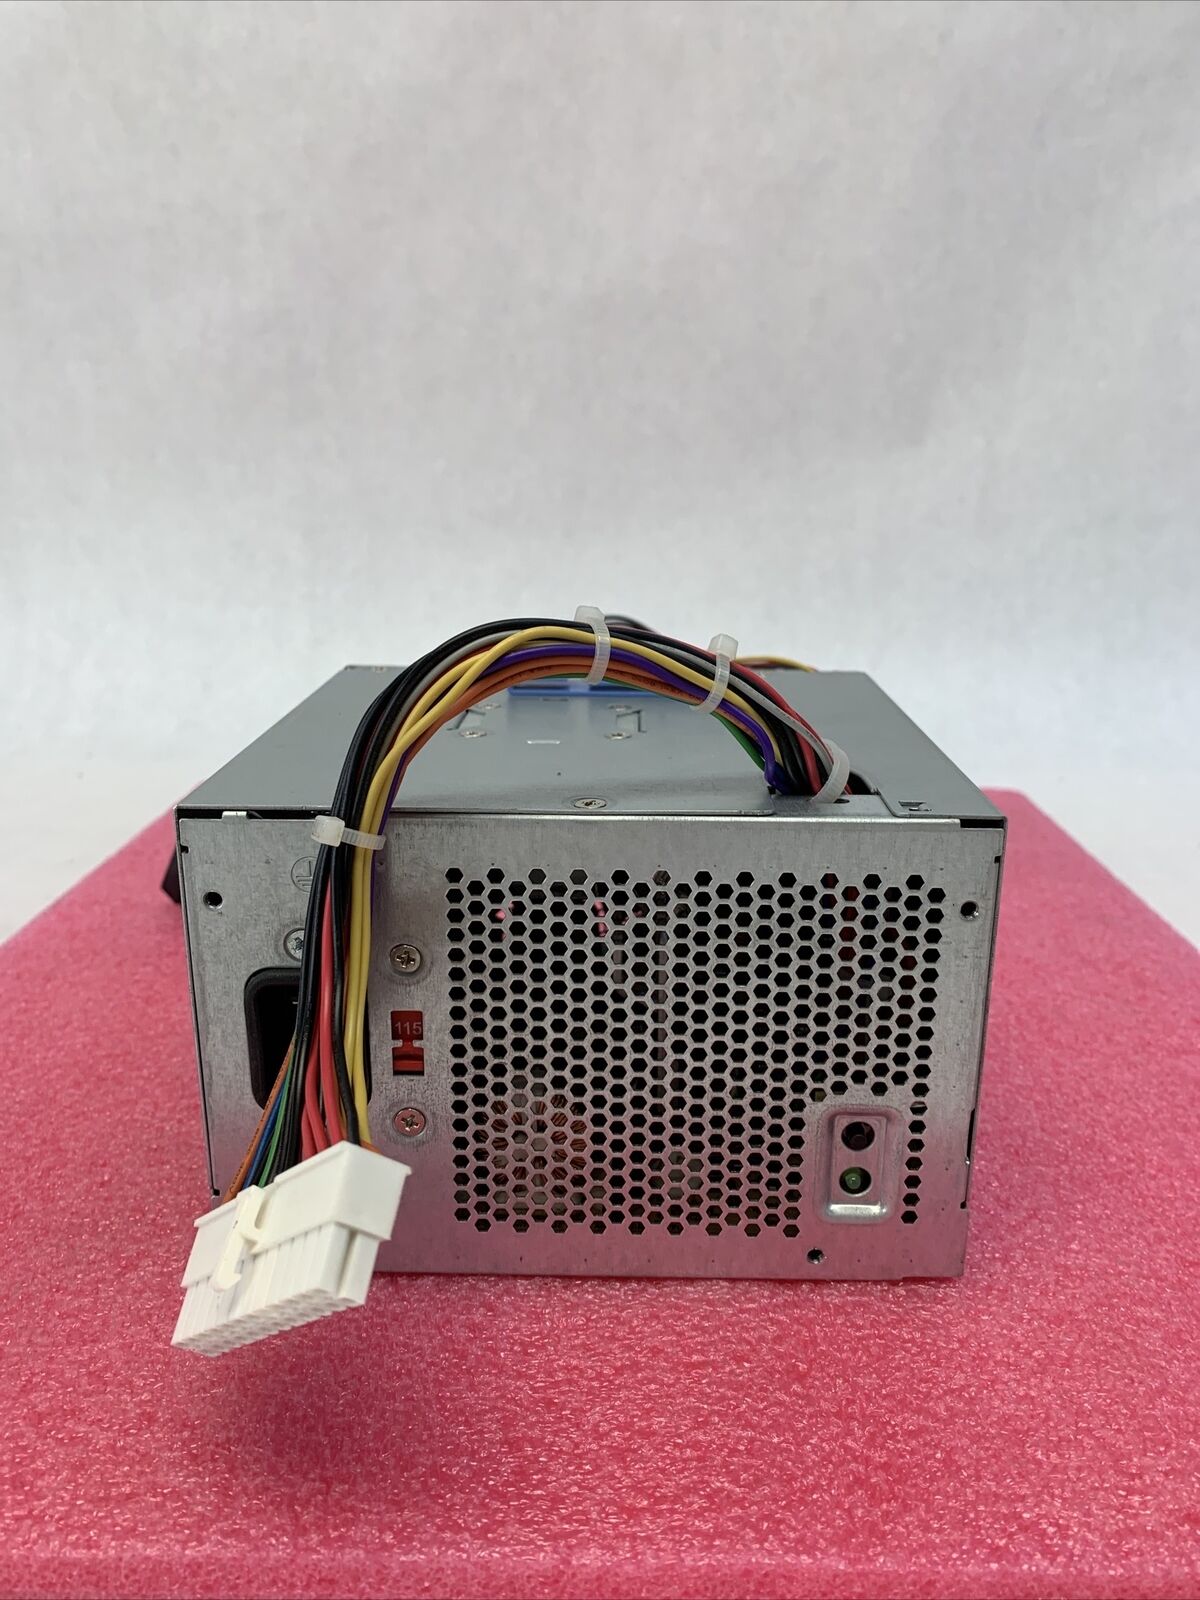 Dell NPS-255BB A 255W Power Supply